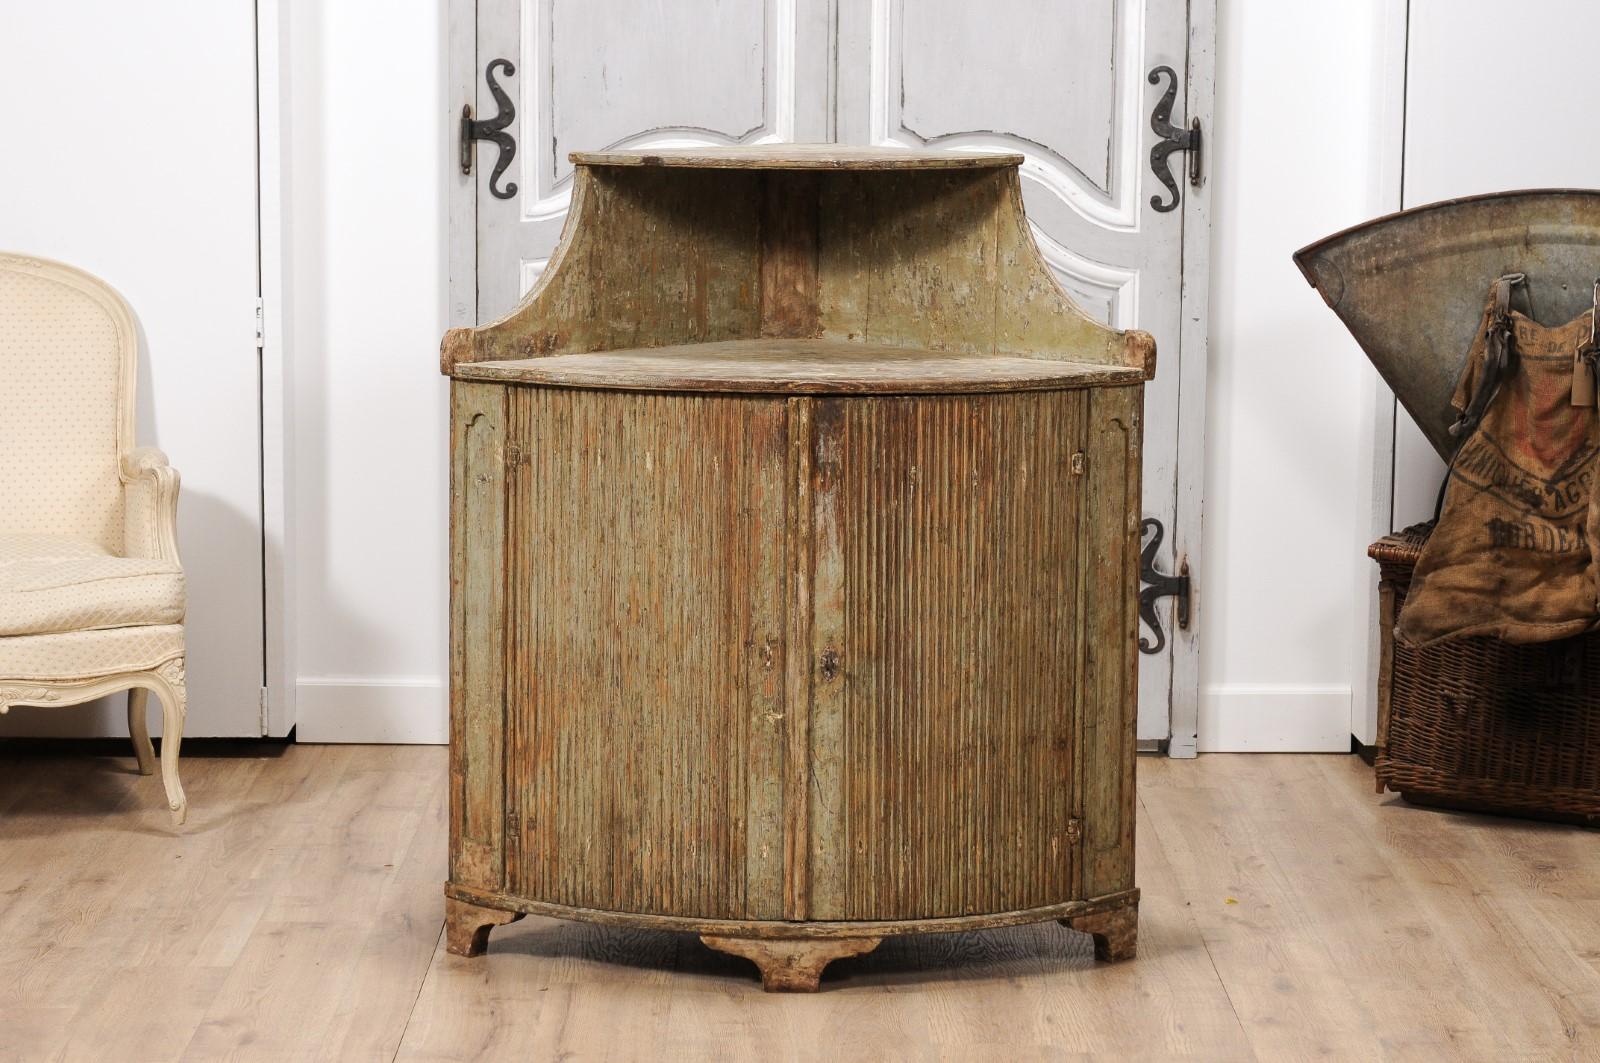 A Swedish Gustavian period painted corner buffet from the 18th century with open shelf at the top, bow front, carved reeded doors, simply carved bracket feet and distressed finish. Immerse yourself in the world of historic Scandinavian elegance with